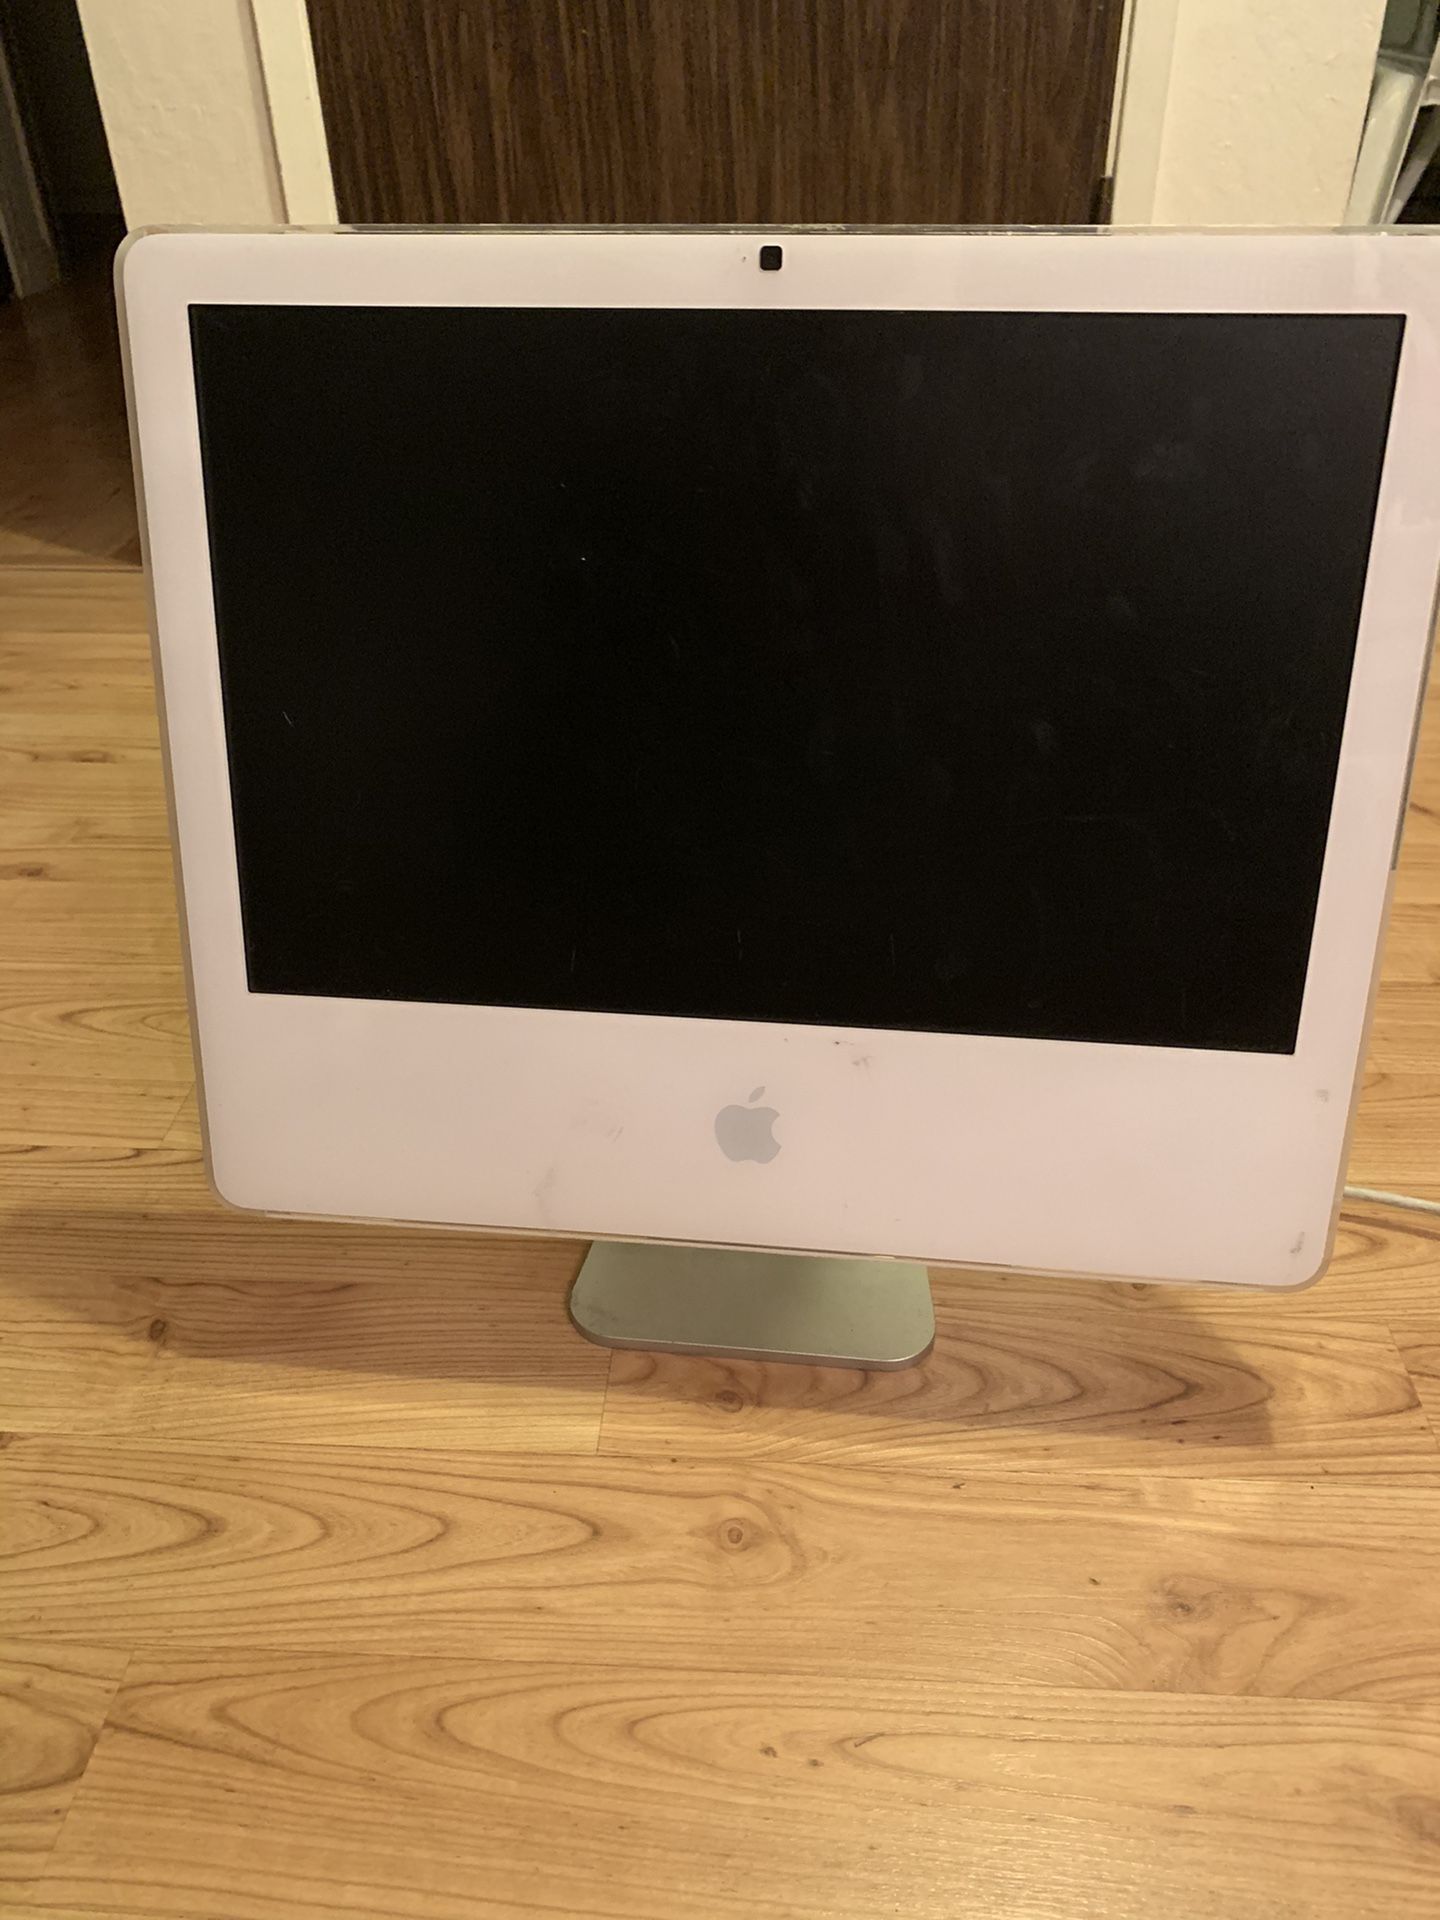 Apple Computer iMac with Graphic Design Software